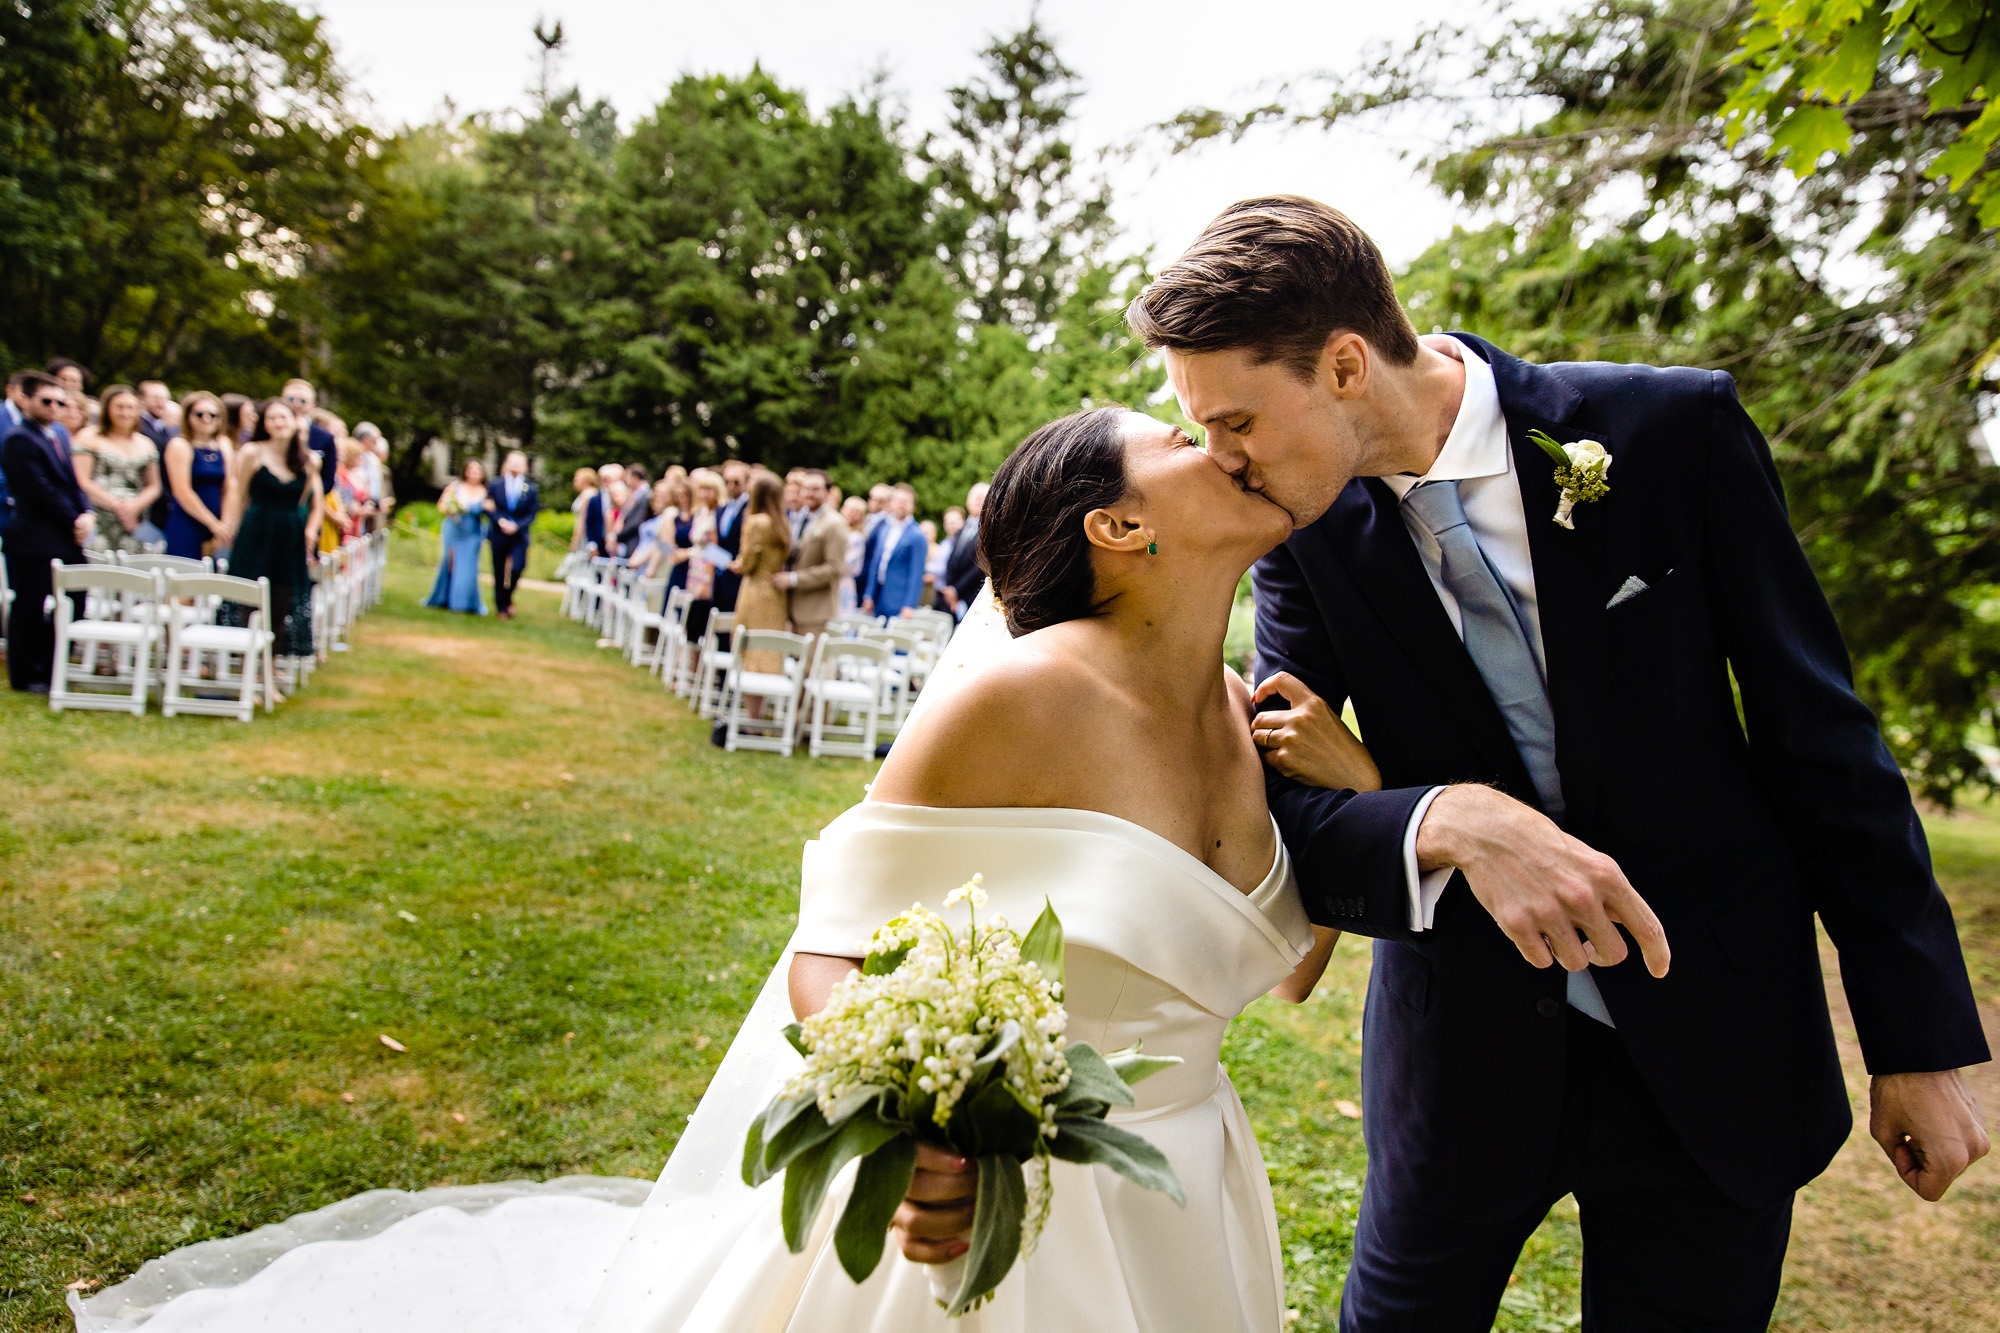 A beautiful wedding ceremony at Strawbery Banke Museum in Portsmouth, NH